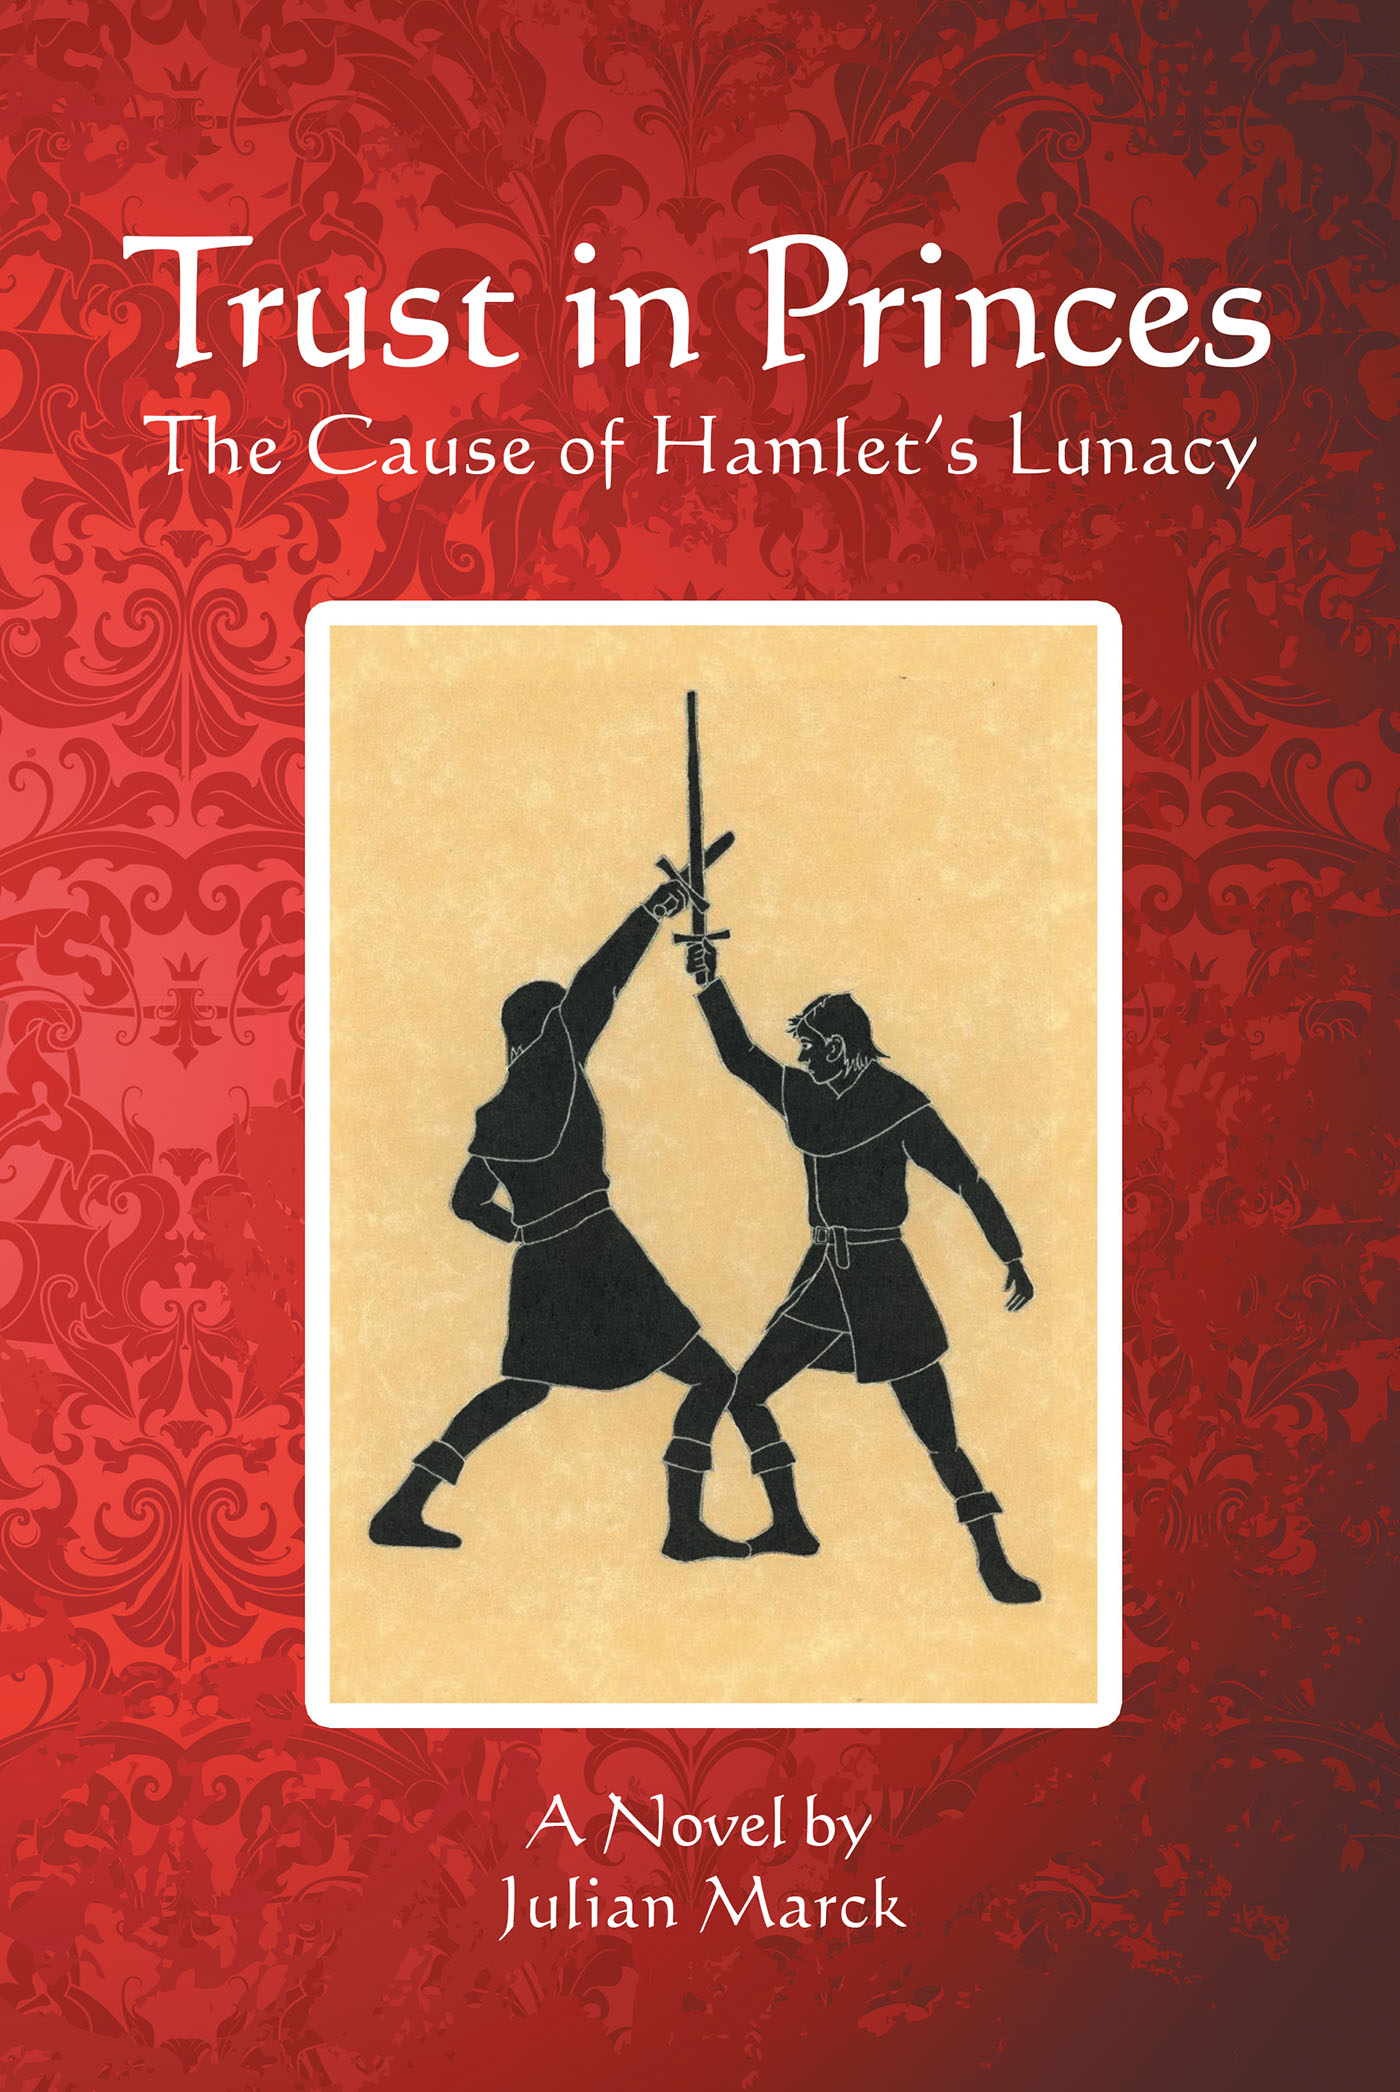 Julian Marck’s New Book, "Trust in Princes: The Cause of Hamlet's Lunacy," Explores the Upbringing of Prince Hamlet and How His Adolescent Experiences Shaped Him